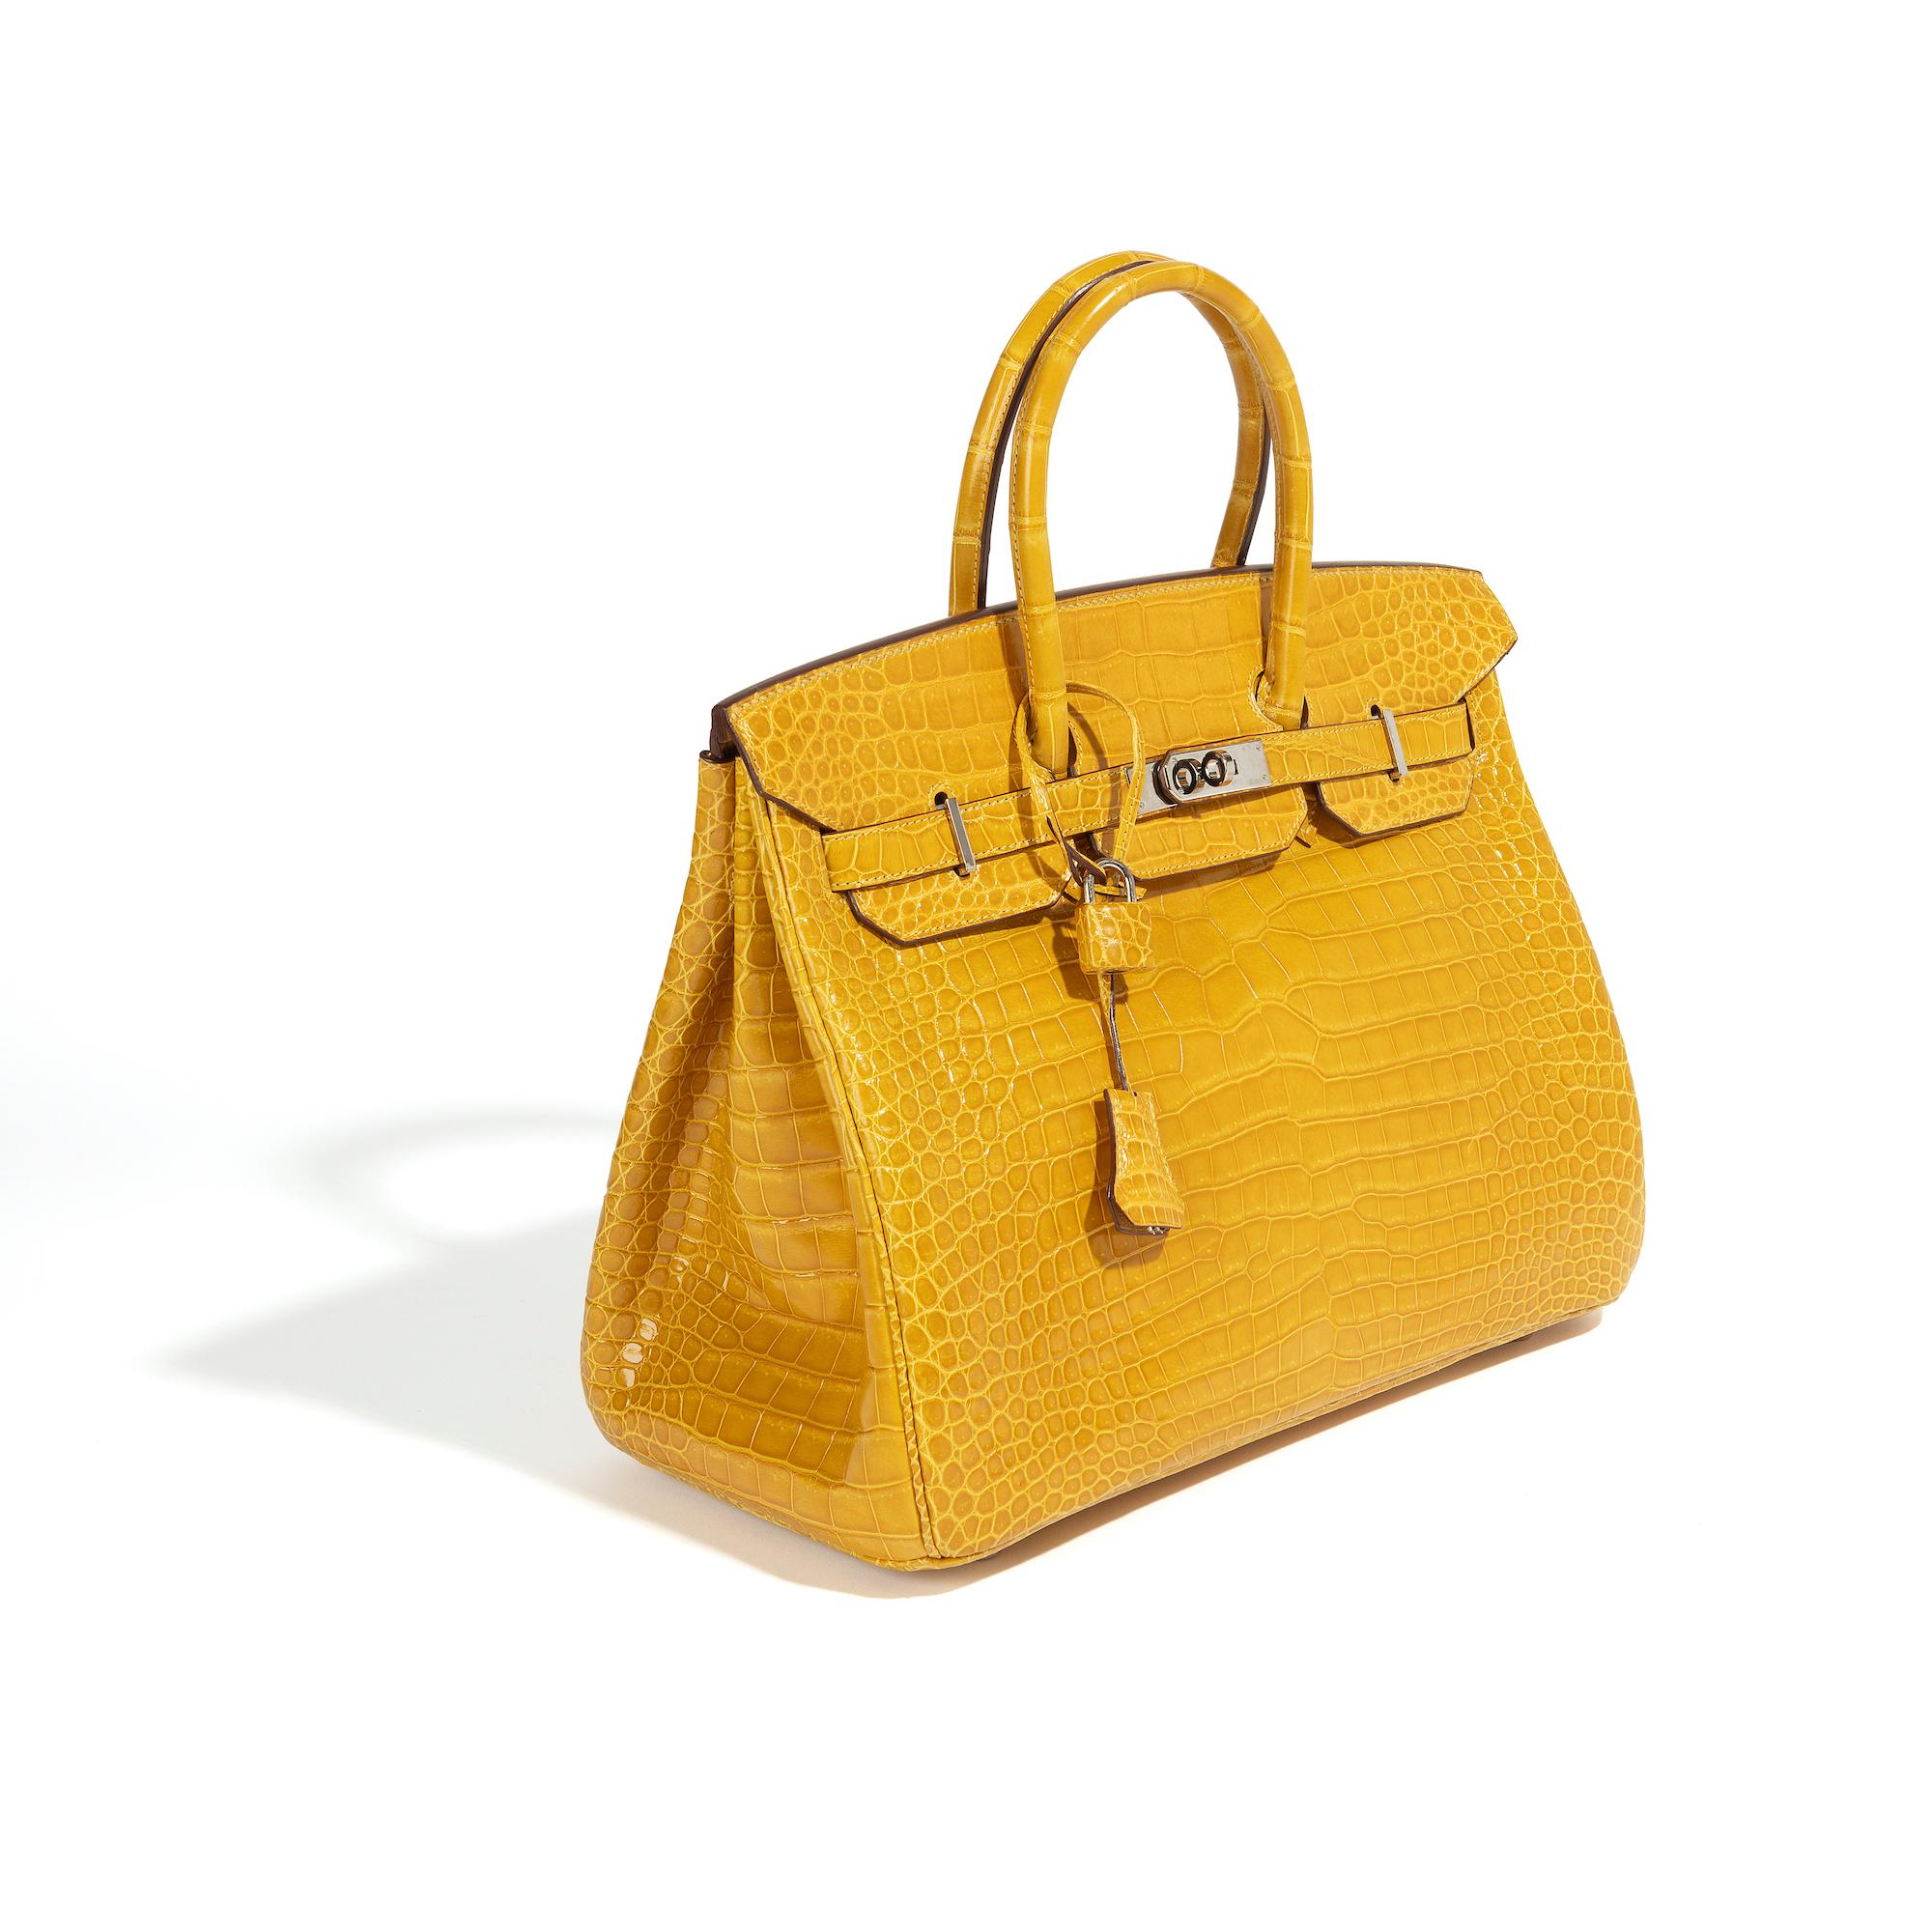 Hermès Birkin 35 Yellow PHW In Excellent Condition For Sale In London, GB